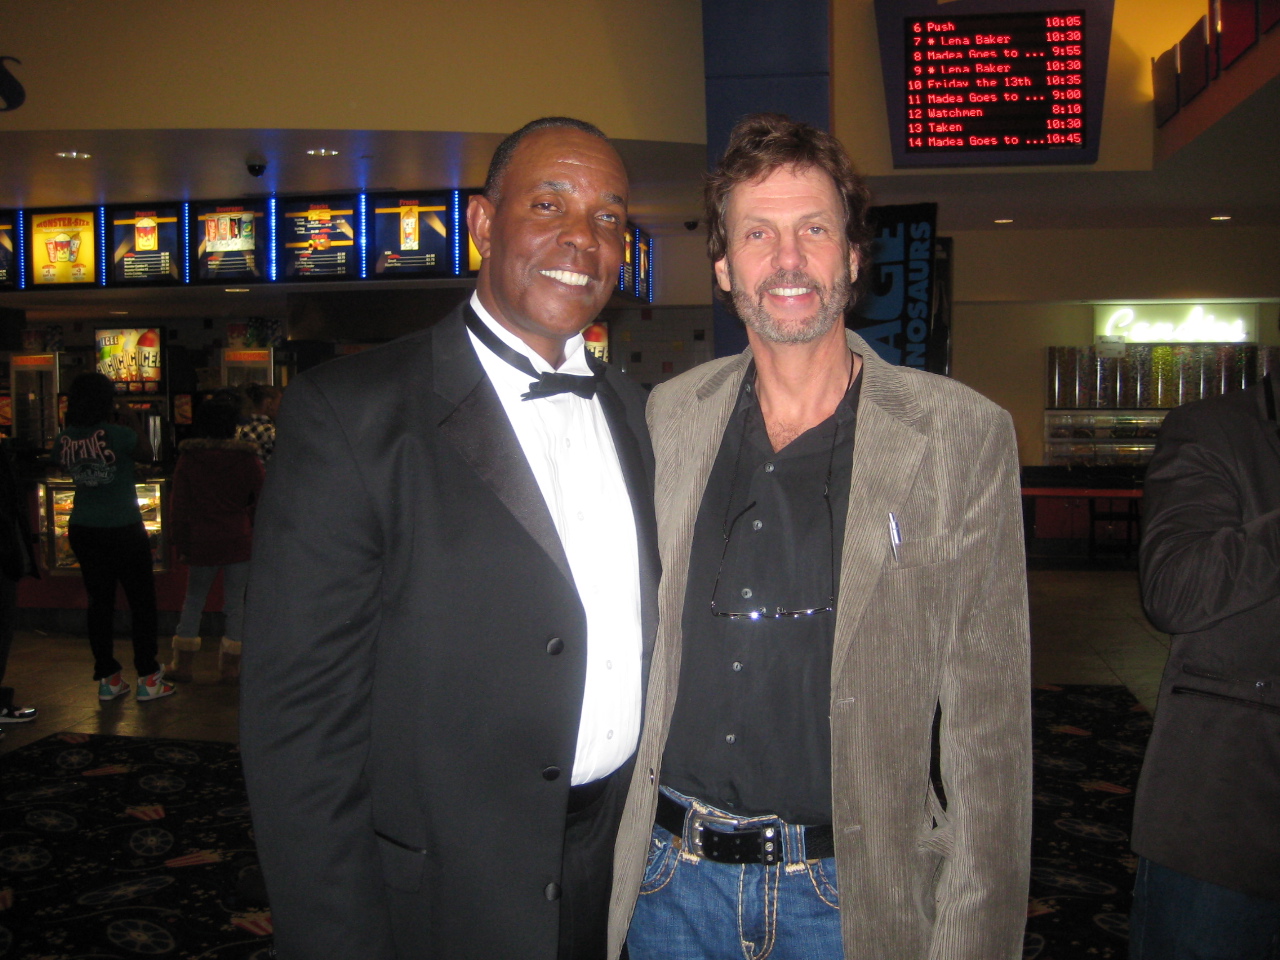 With Ralph Wilcox, Director of HOPE & REDEMPTION at the Atlanta premiere.